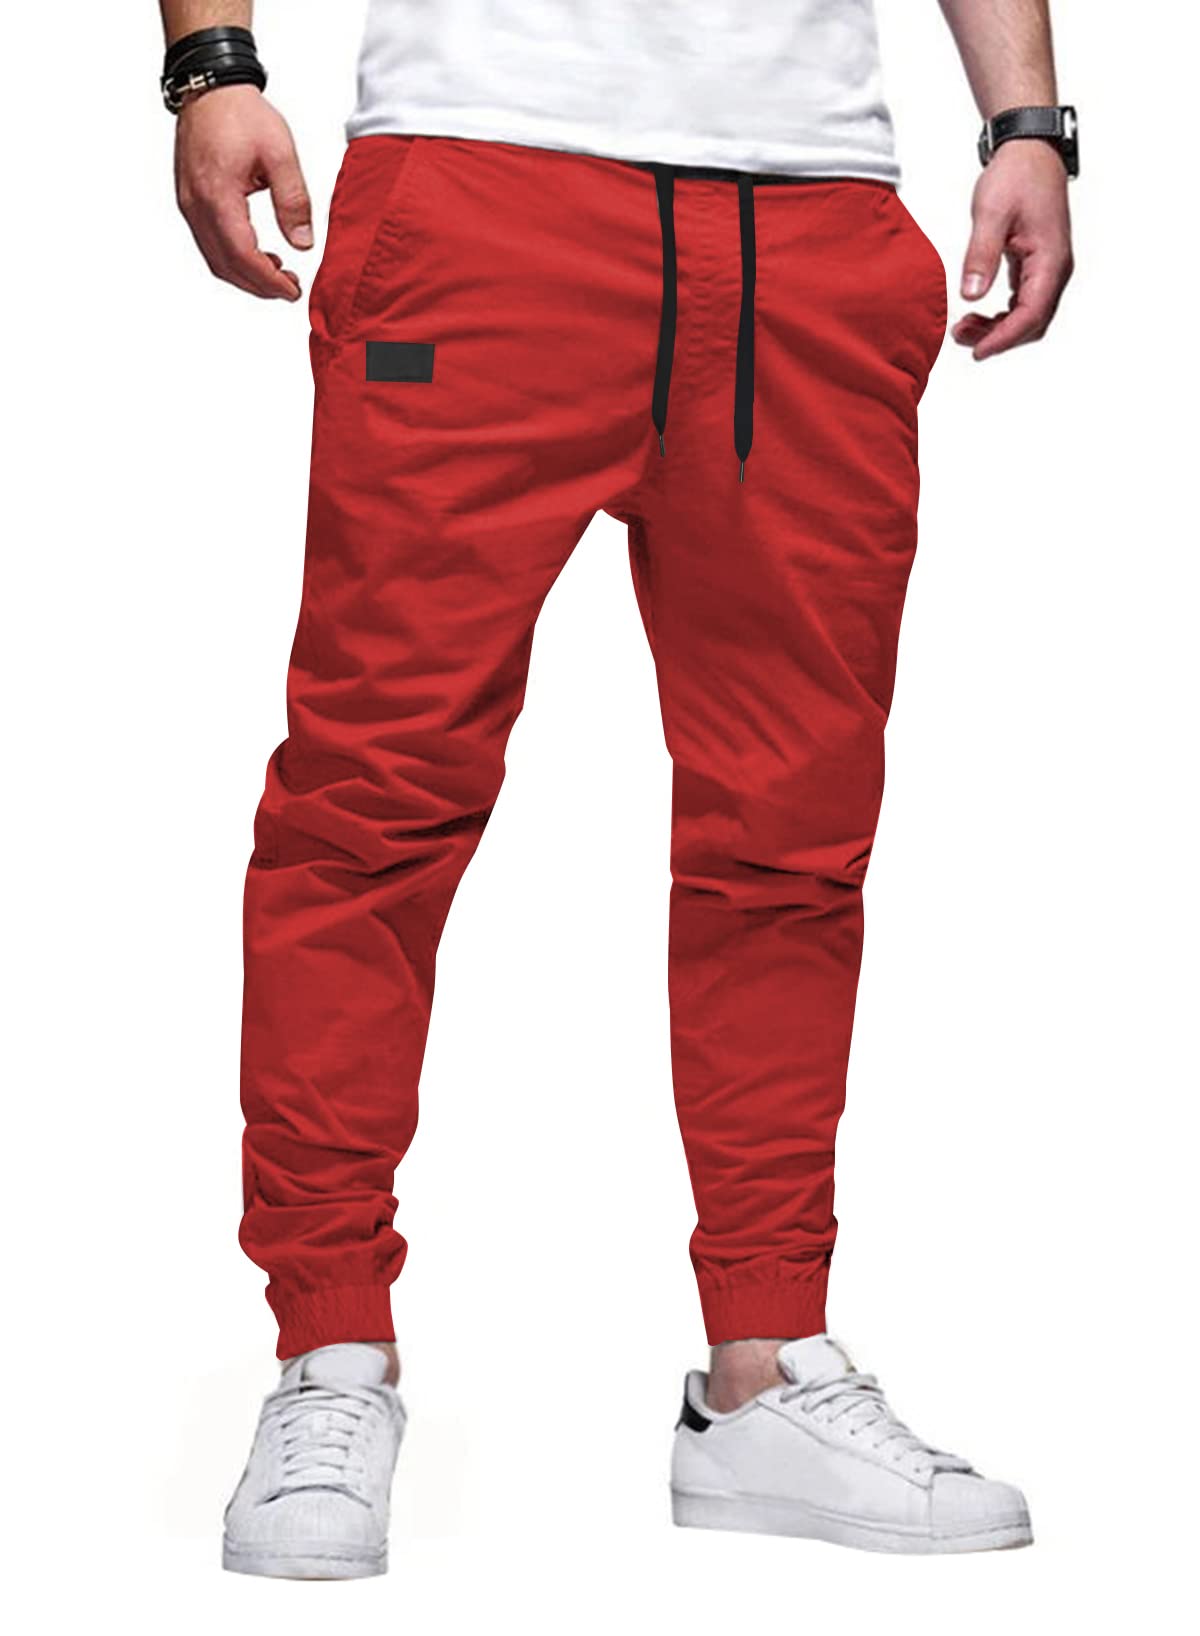 JMIERR Mens casual Joggers Pants - cotton Drawstring chino cargo Pants Hiking Outdoor Twill Track Jogging Sweatpants Pants with 